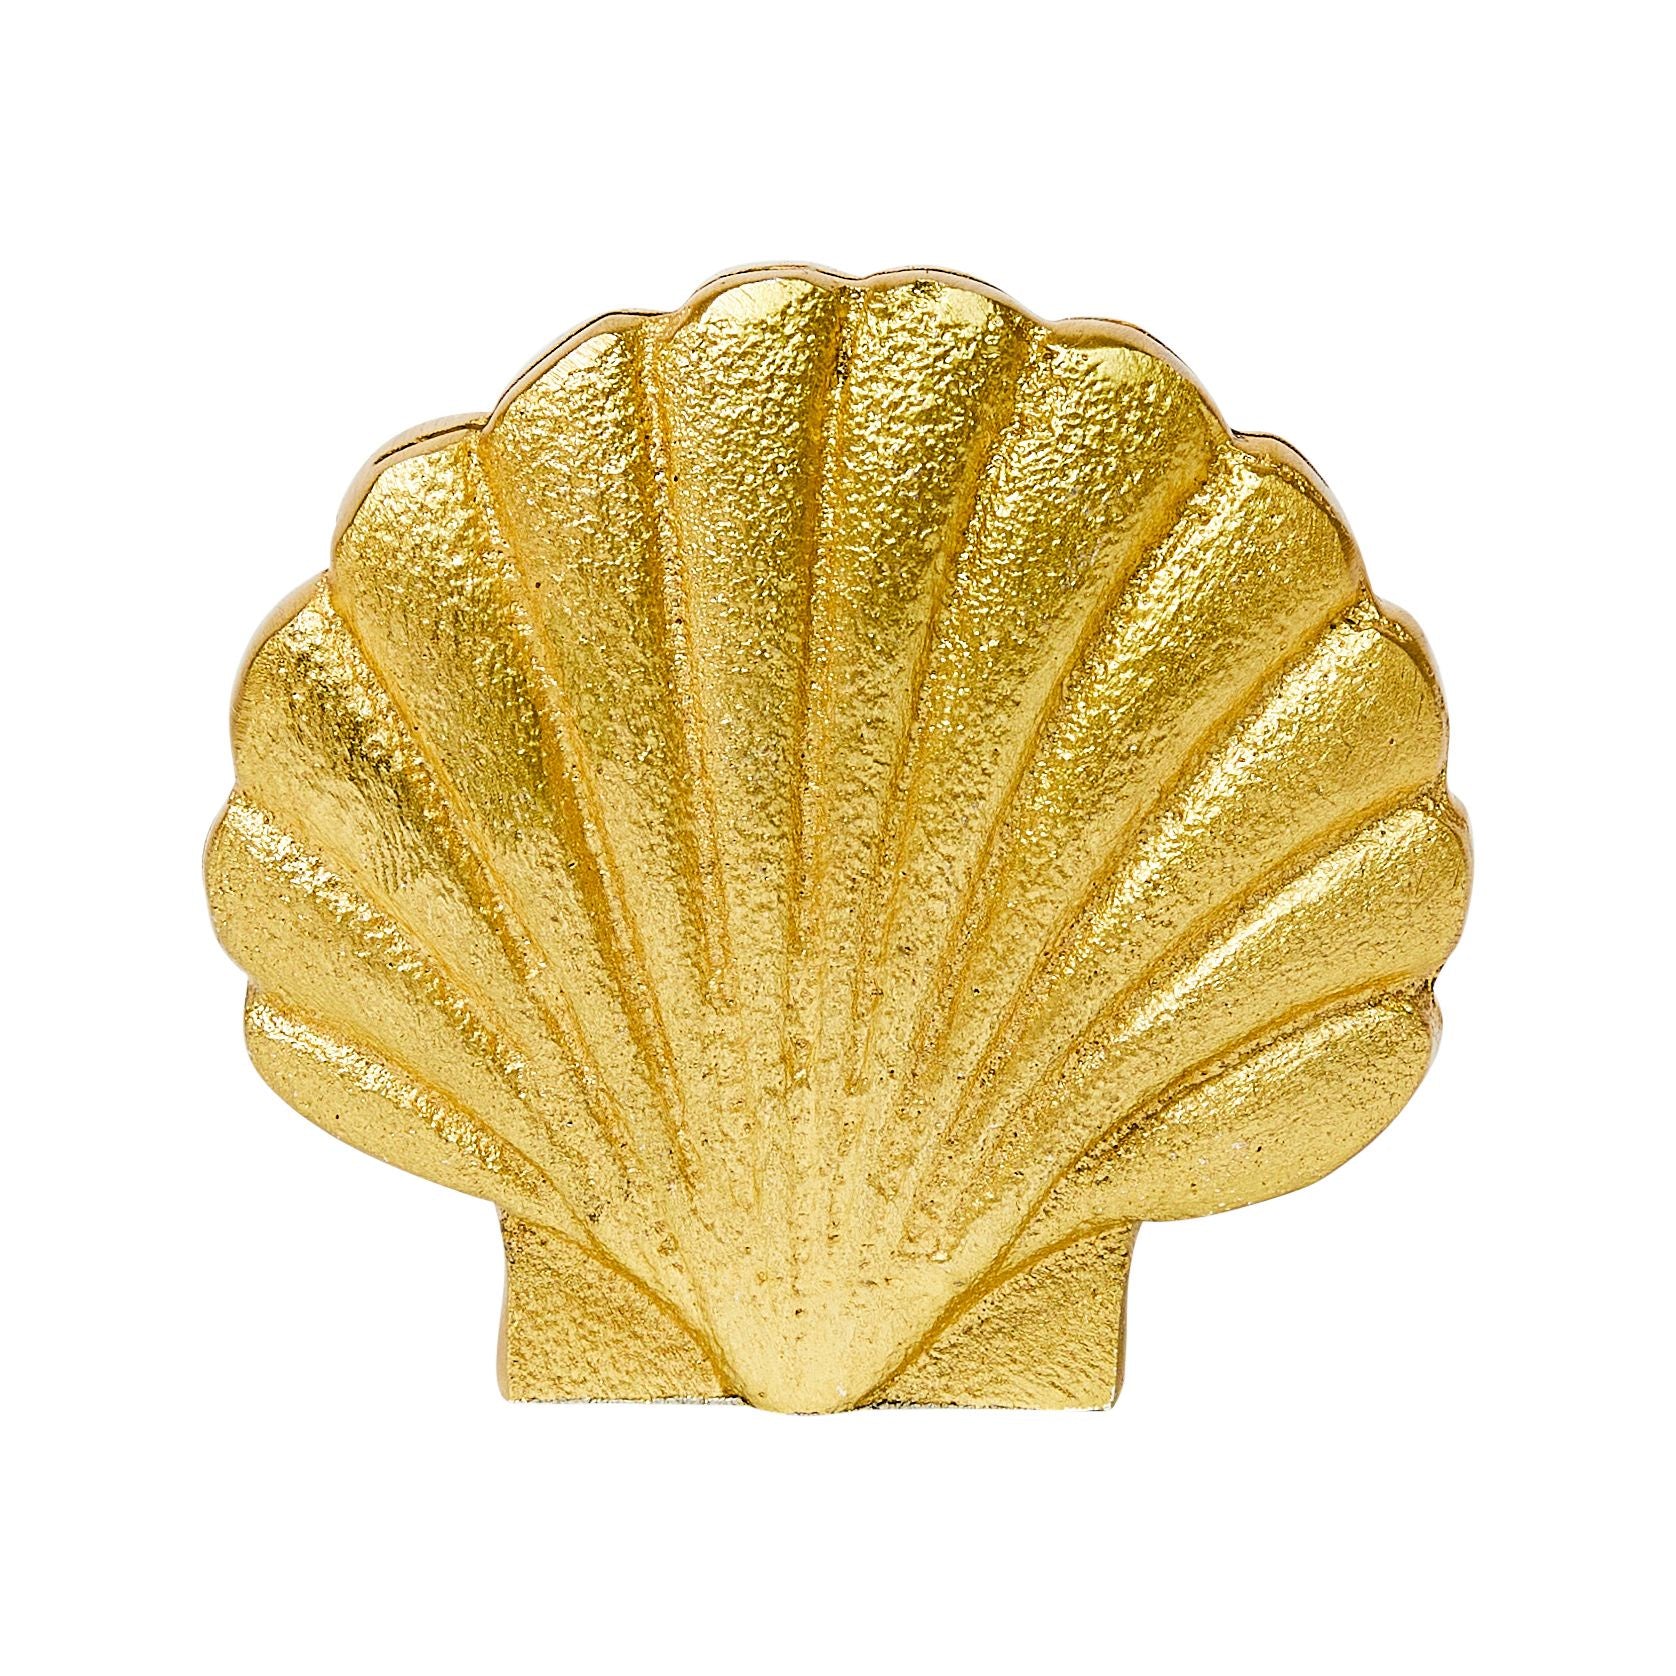 Clam Shell Place Holders – Habeo Australia